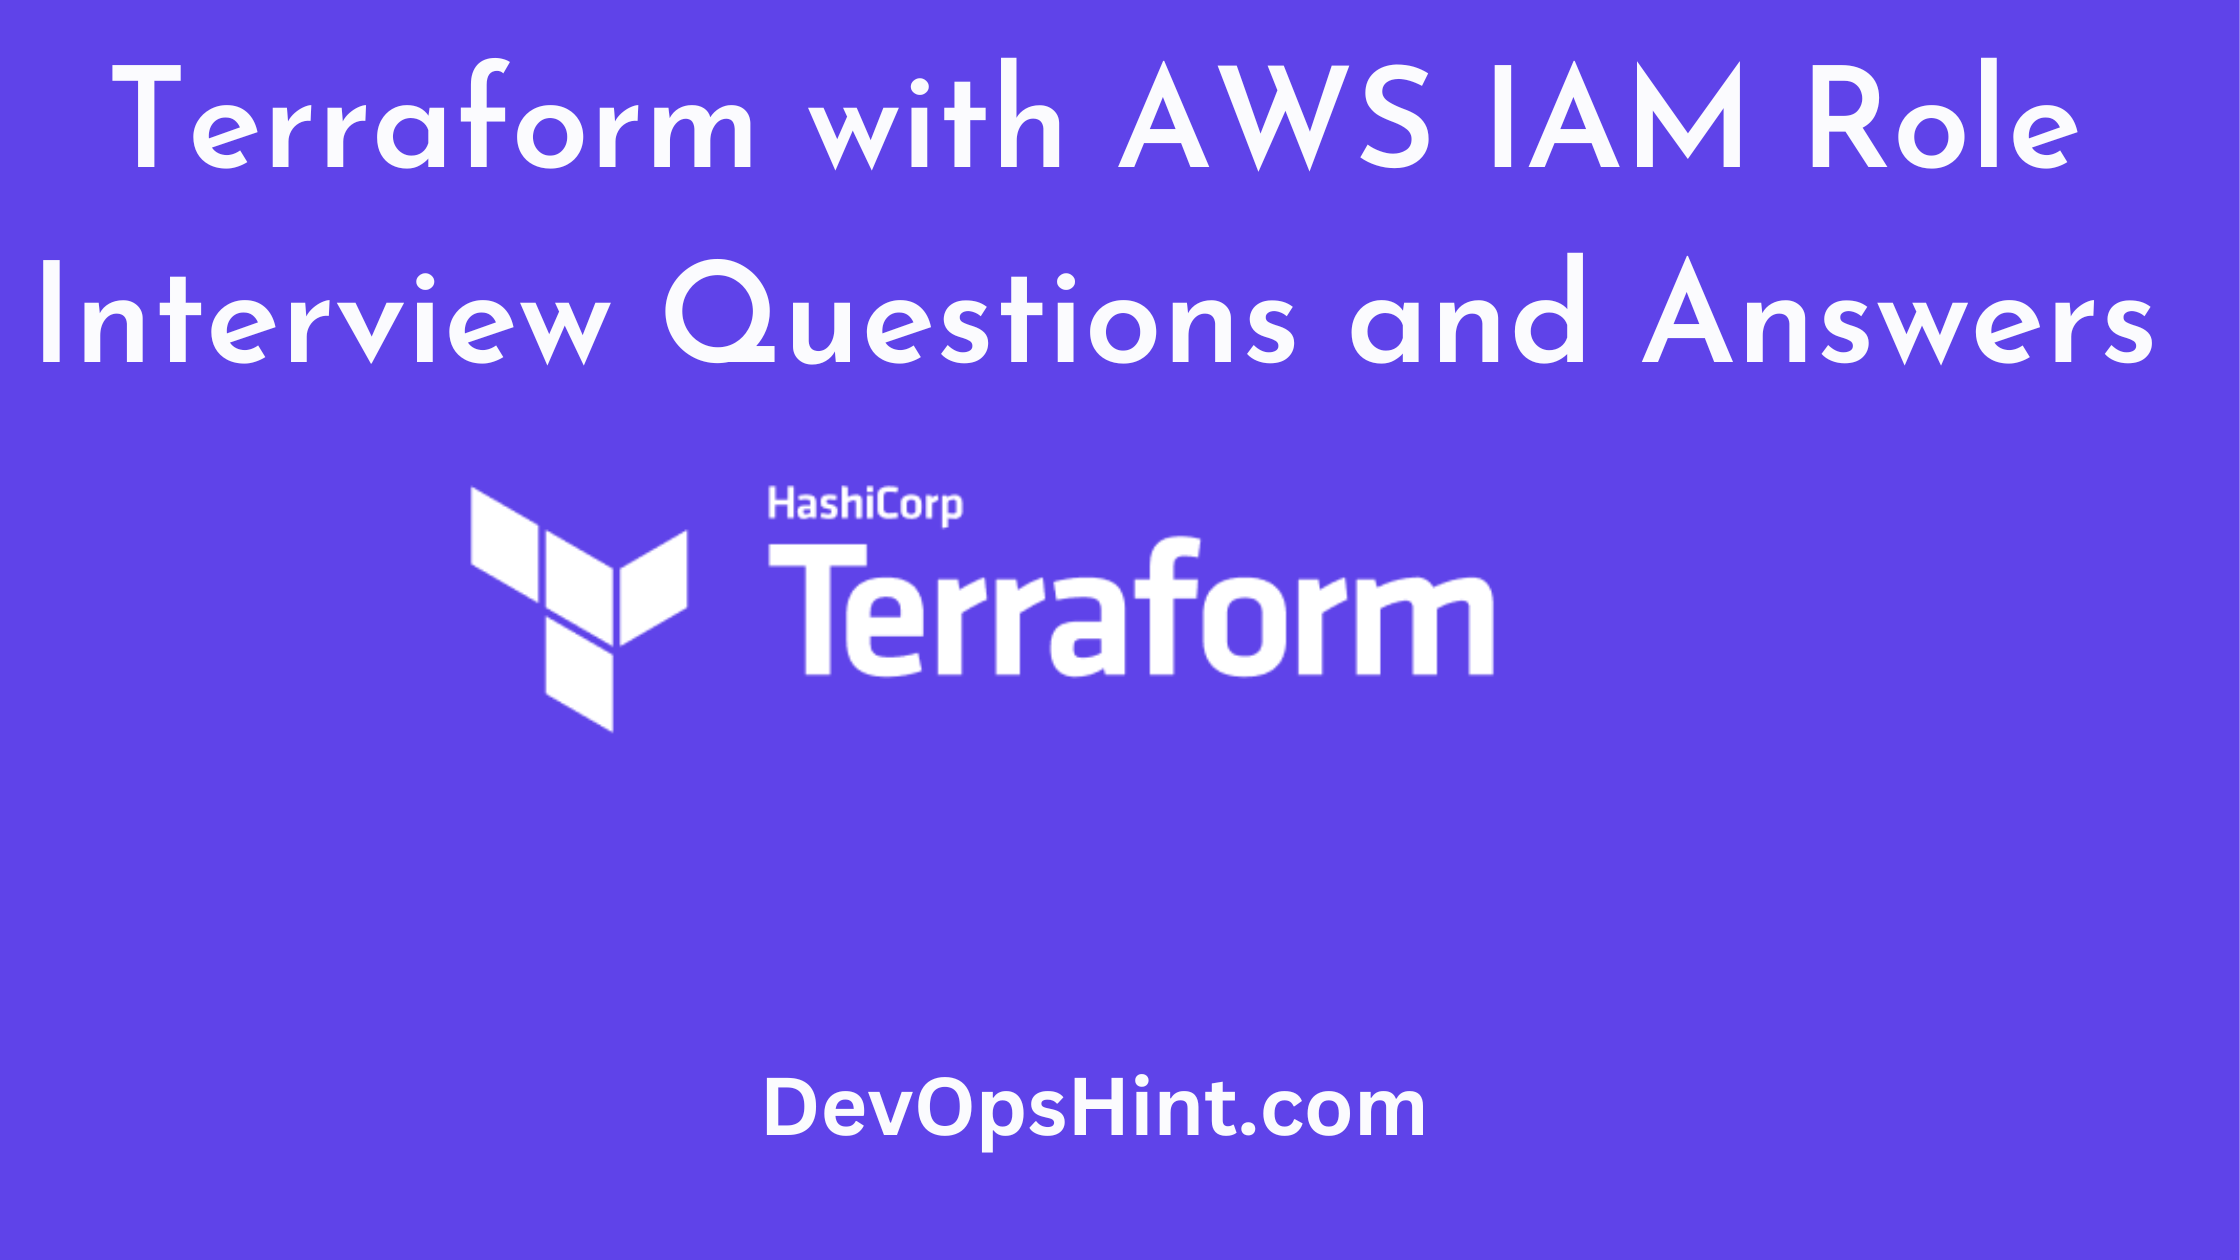 Terraform with AWS IAM Role Interview Questions and Answers